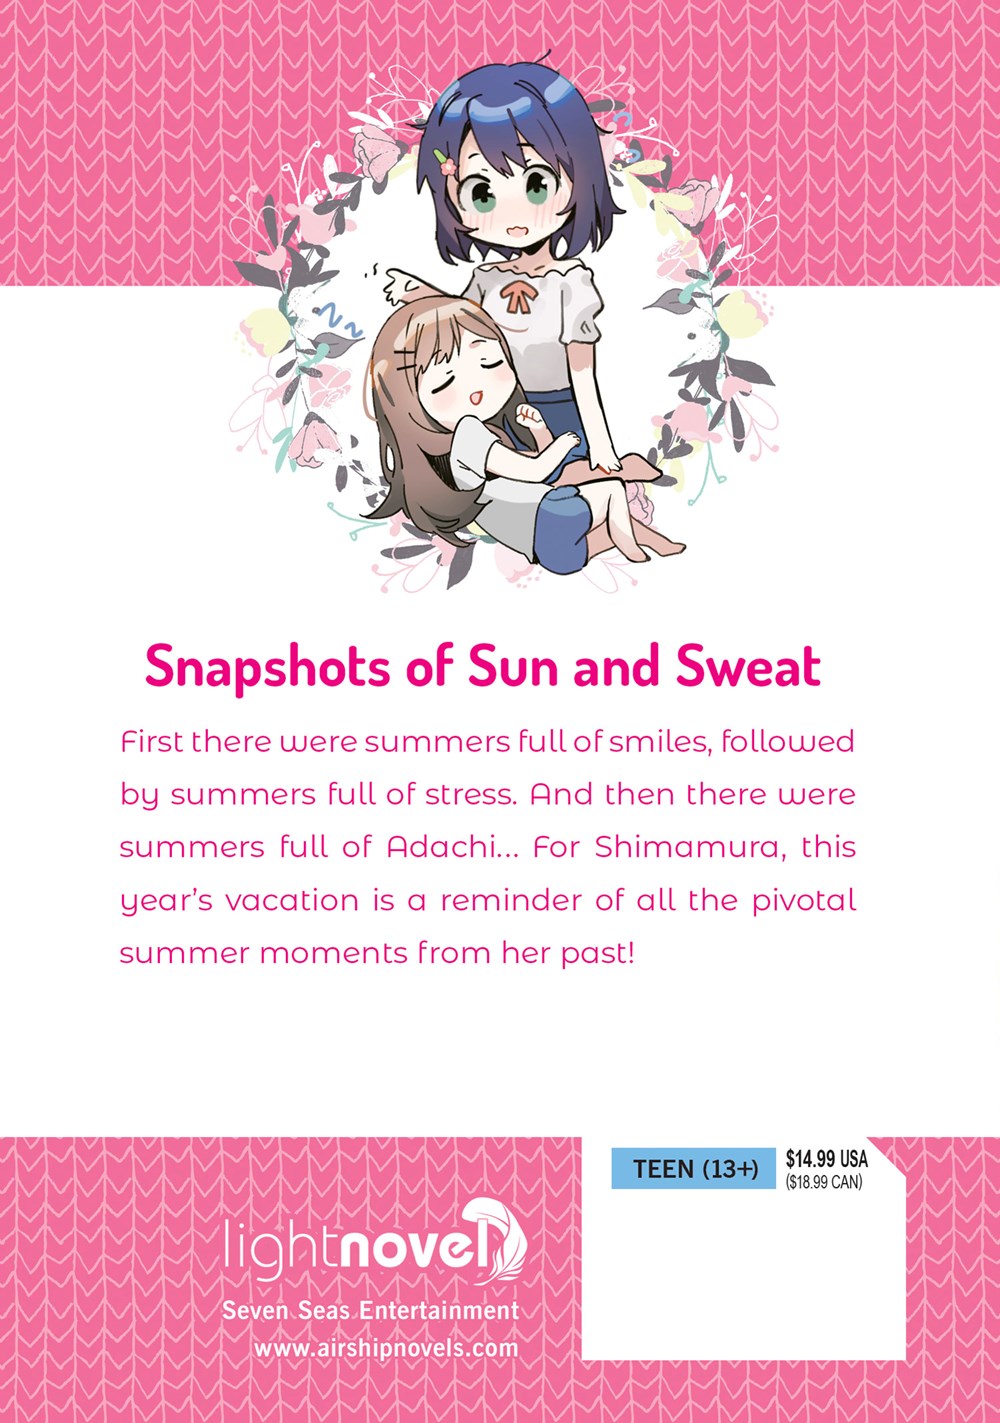 Seven Seas Entertainment on X: ADACHI AND SHIMAMURA (LIGHT NOVEL) Vol. 11  The slice-of-life series about a sweet romance between high school  girls–now an anime series! Out today in print/digital! See RETAILERS